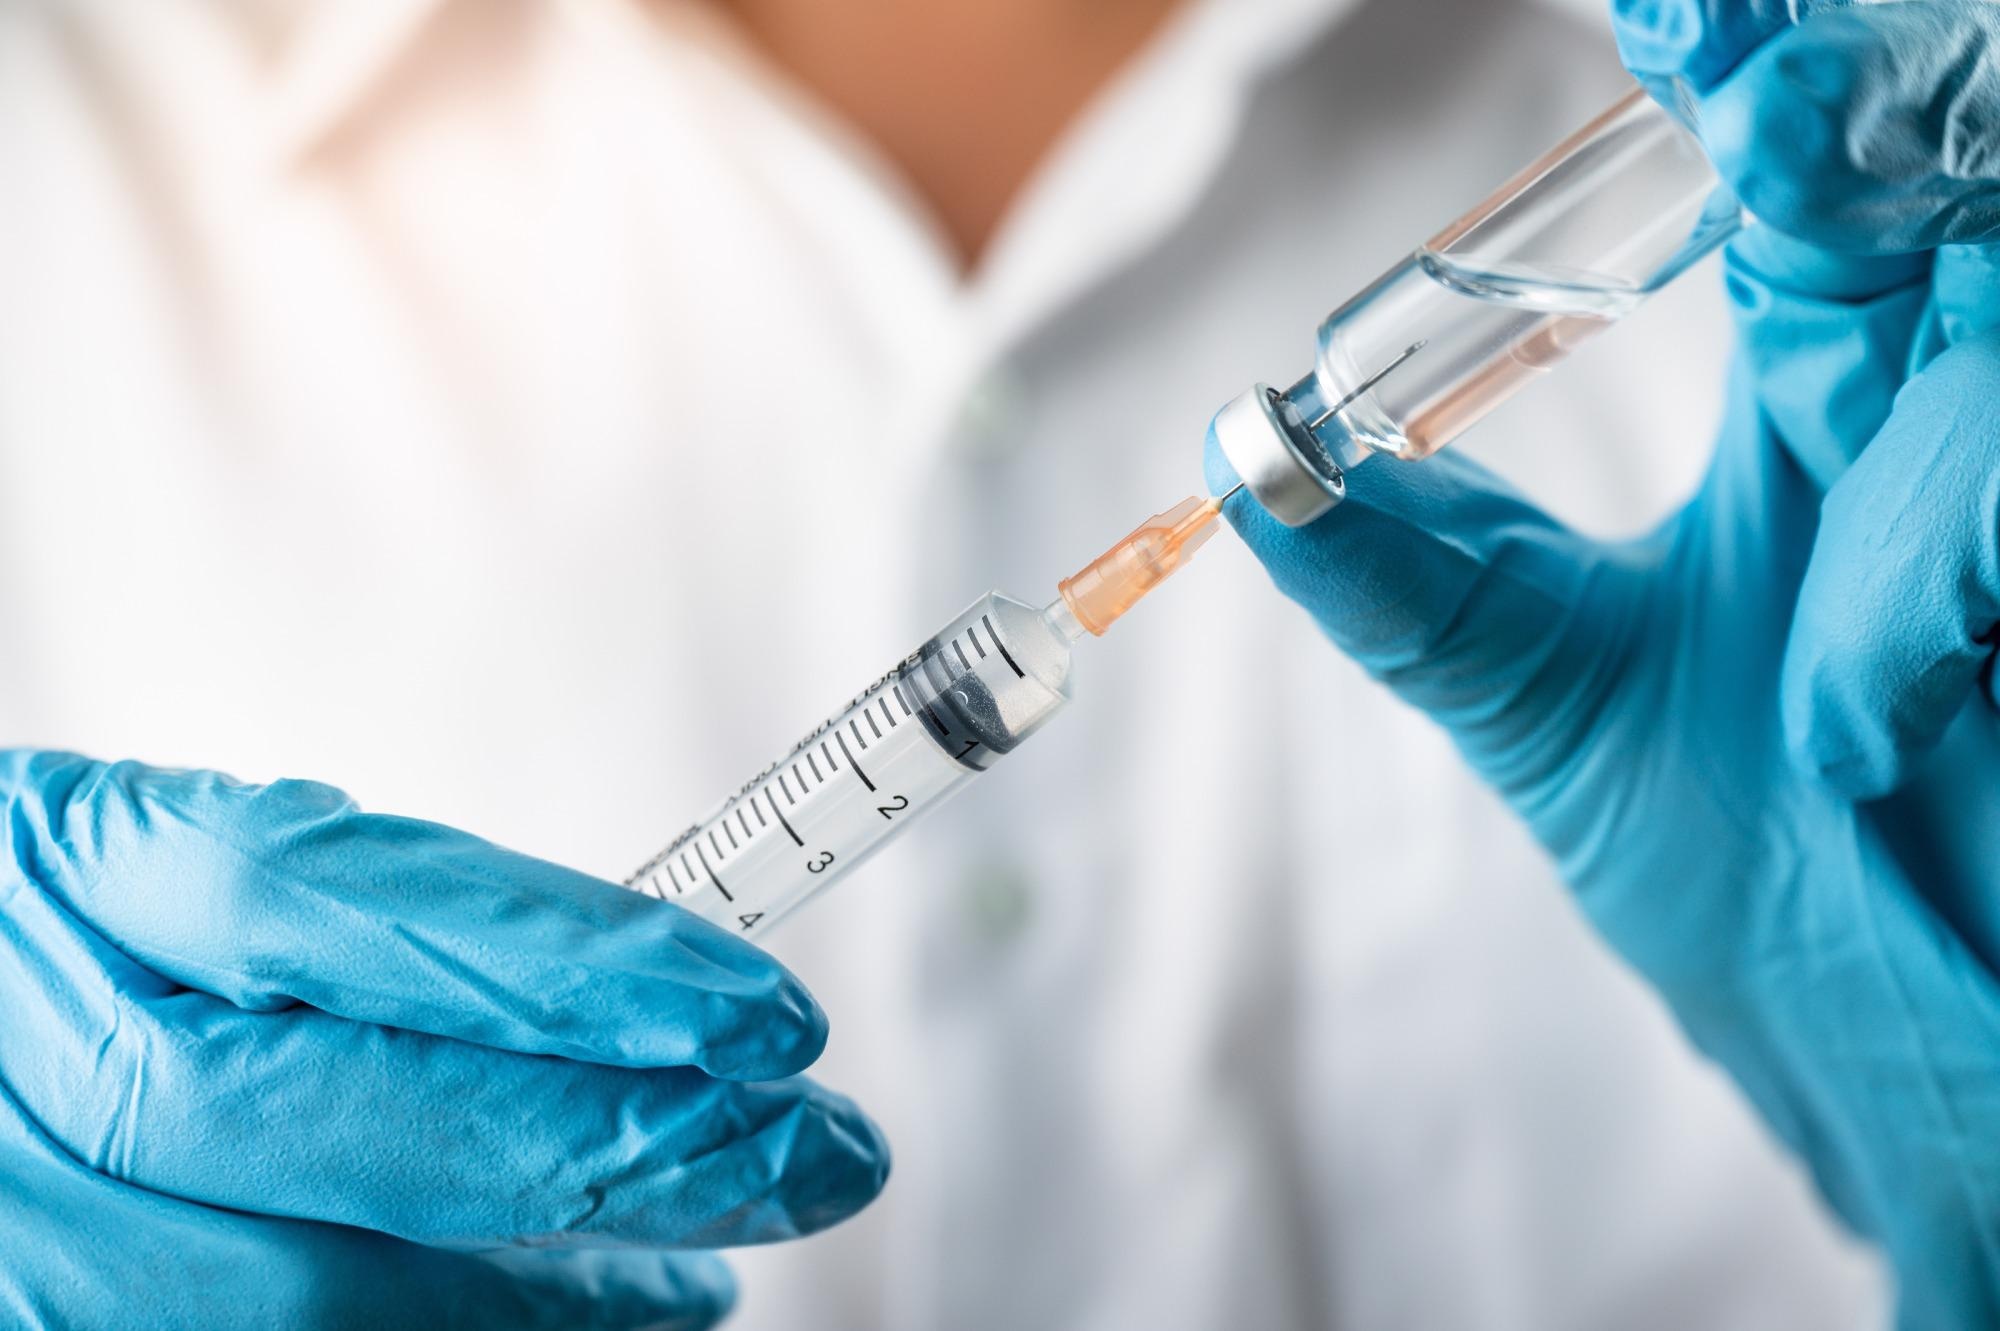 Study: Homologous and heterologous boosting of the ChAdOx1-S1-S COVID-19 vaccine with the SCB-2019 vaccine candidate: a randomized, observer-blinded, controlled, phase 2 study. Image Credit: PhotobyTawat / Shutterstock